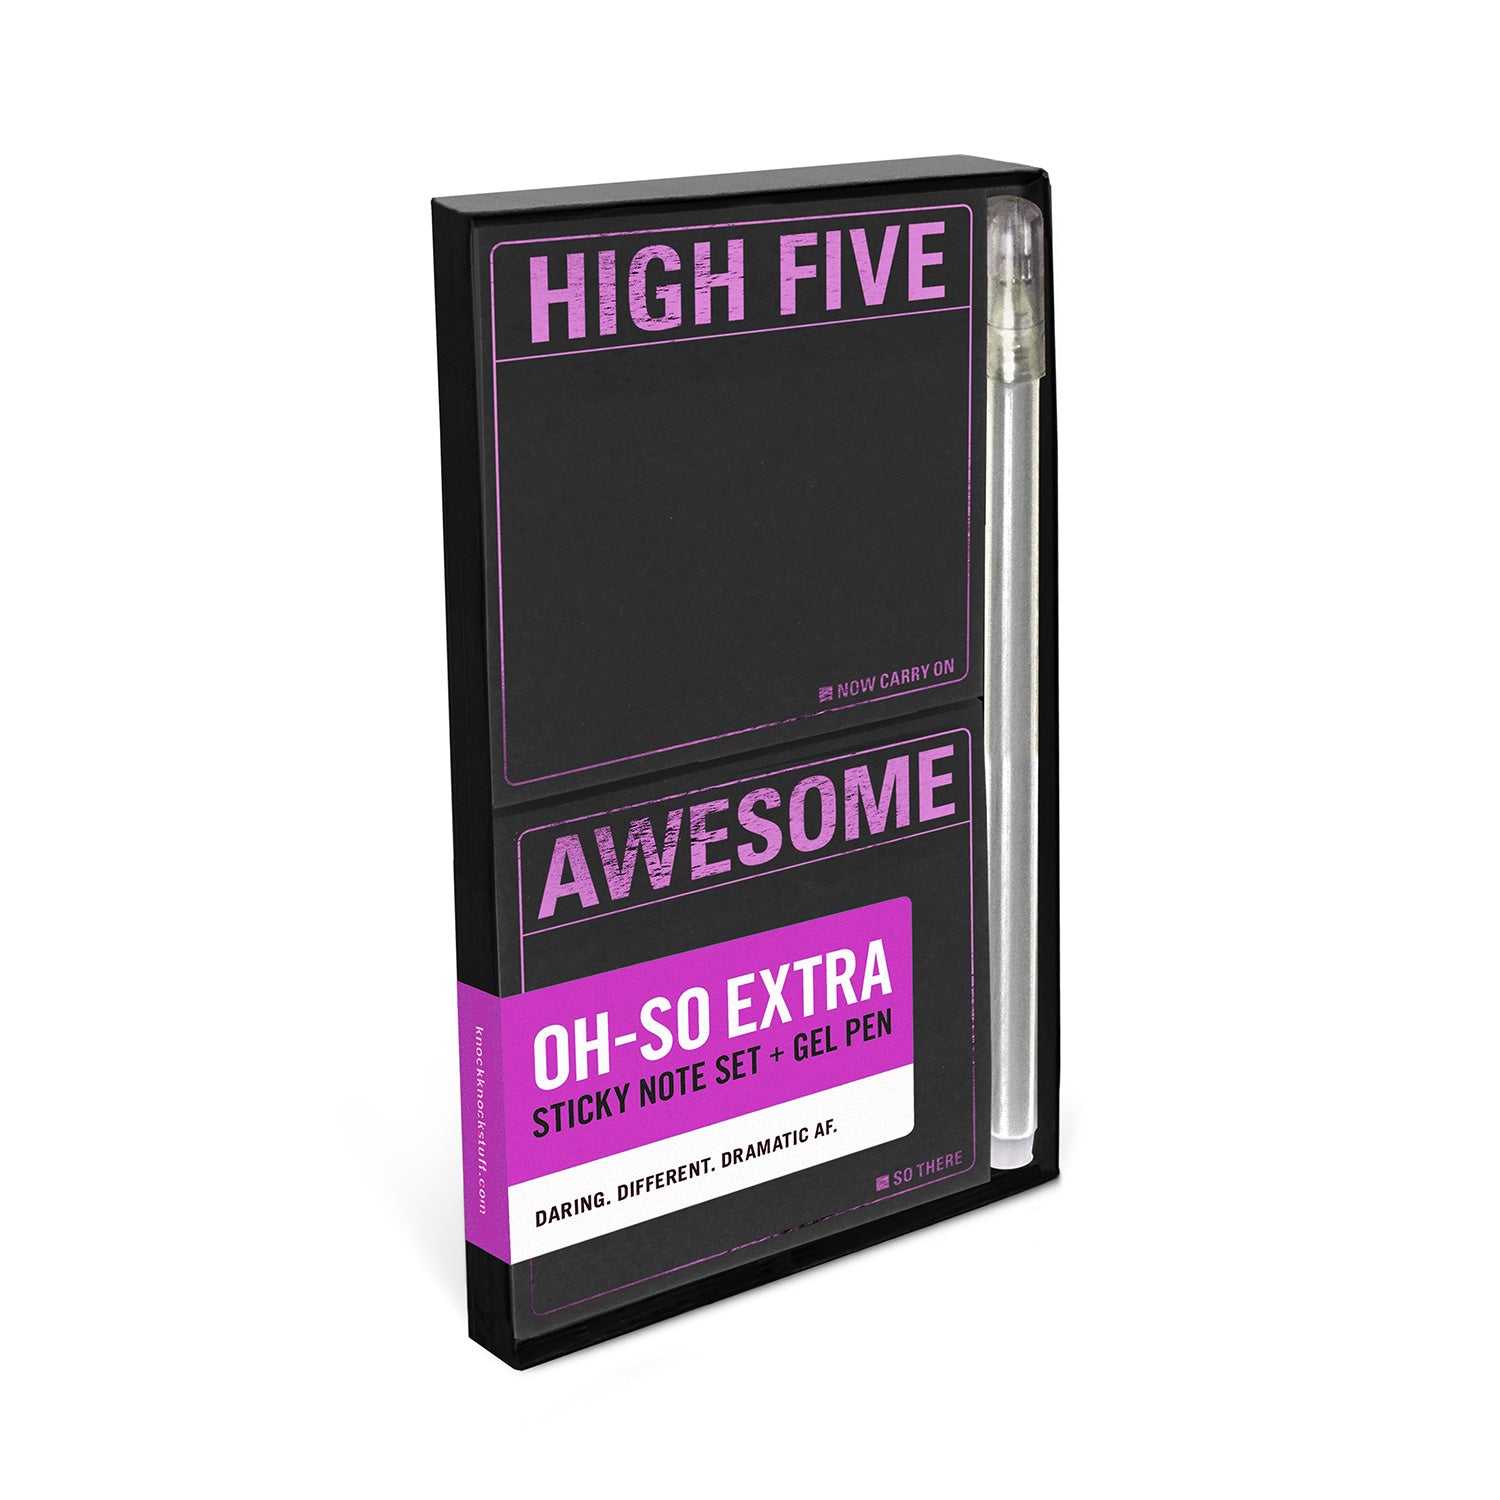 High Five / Awesome Metallic Sticky Note Set + Gel Pen